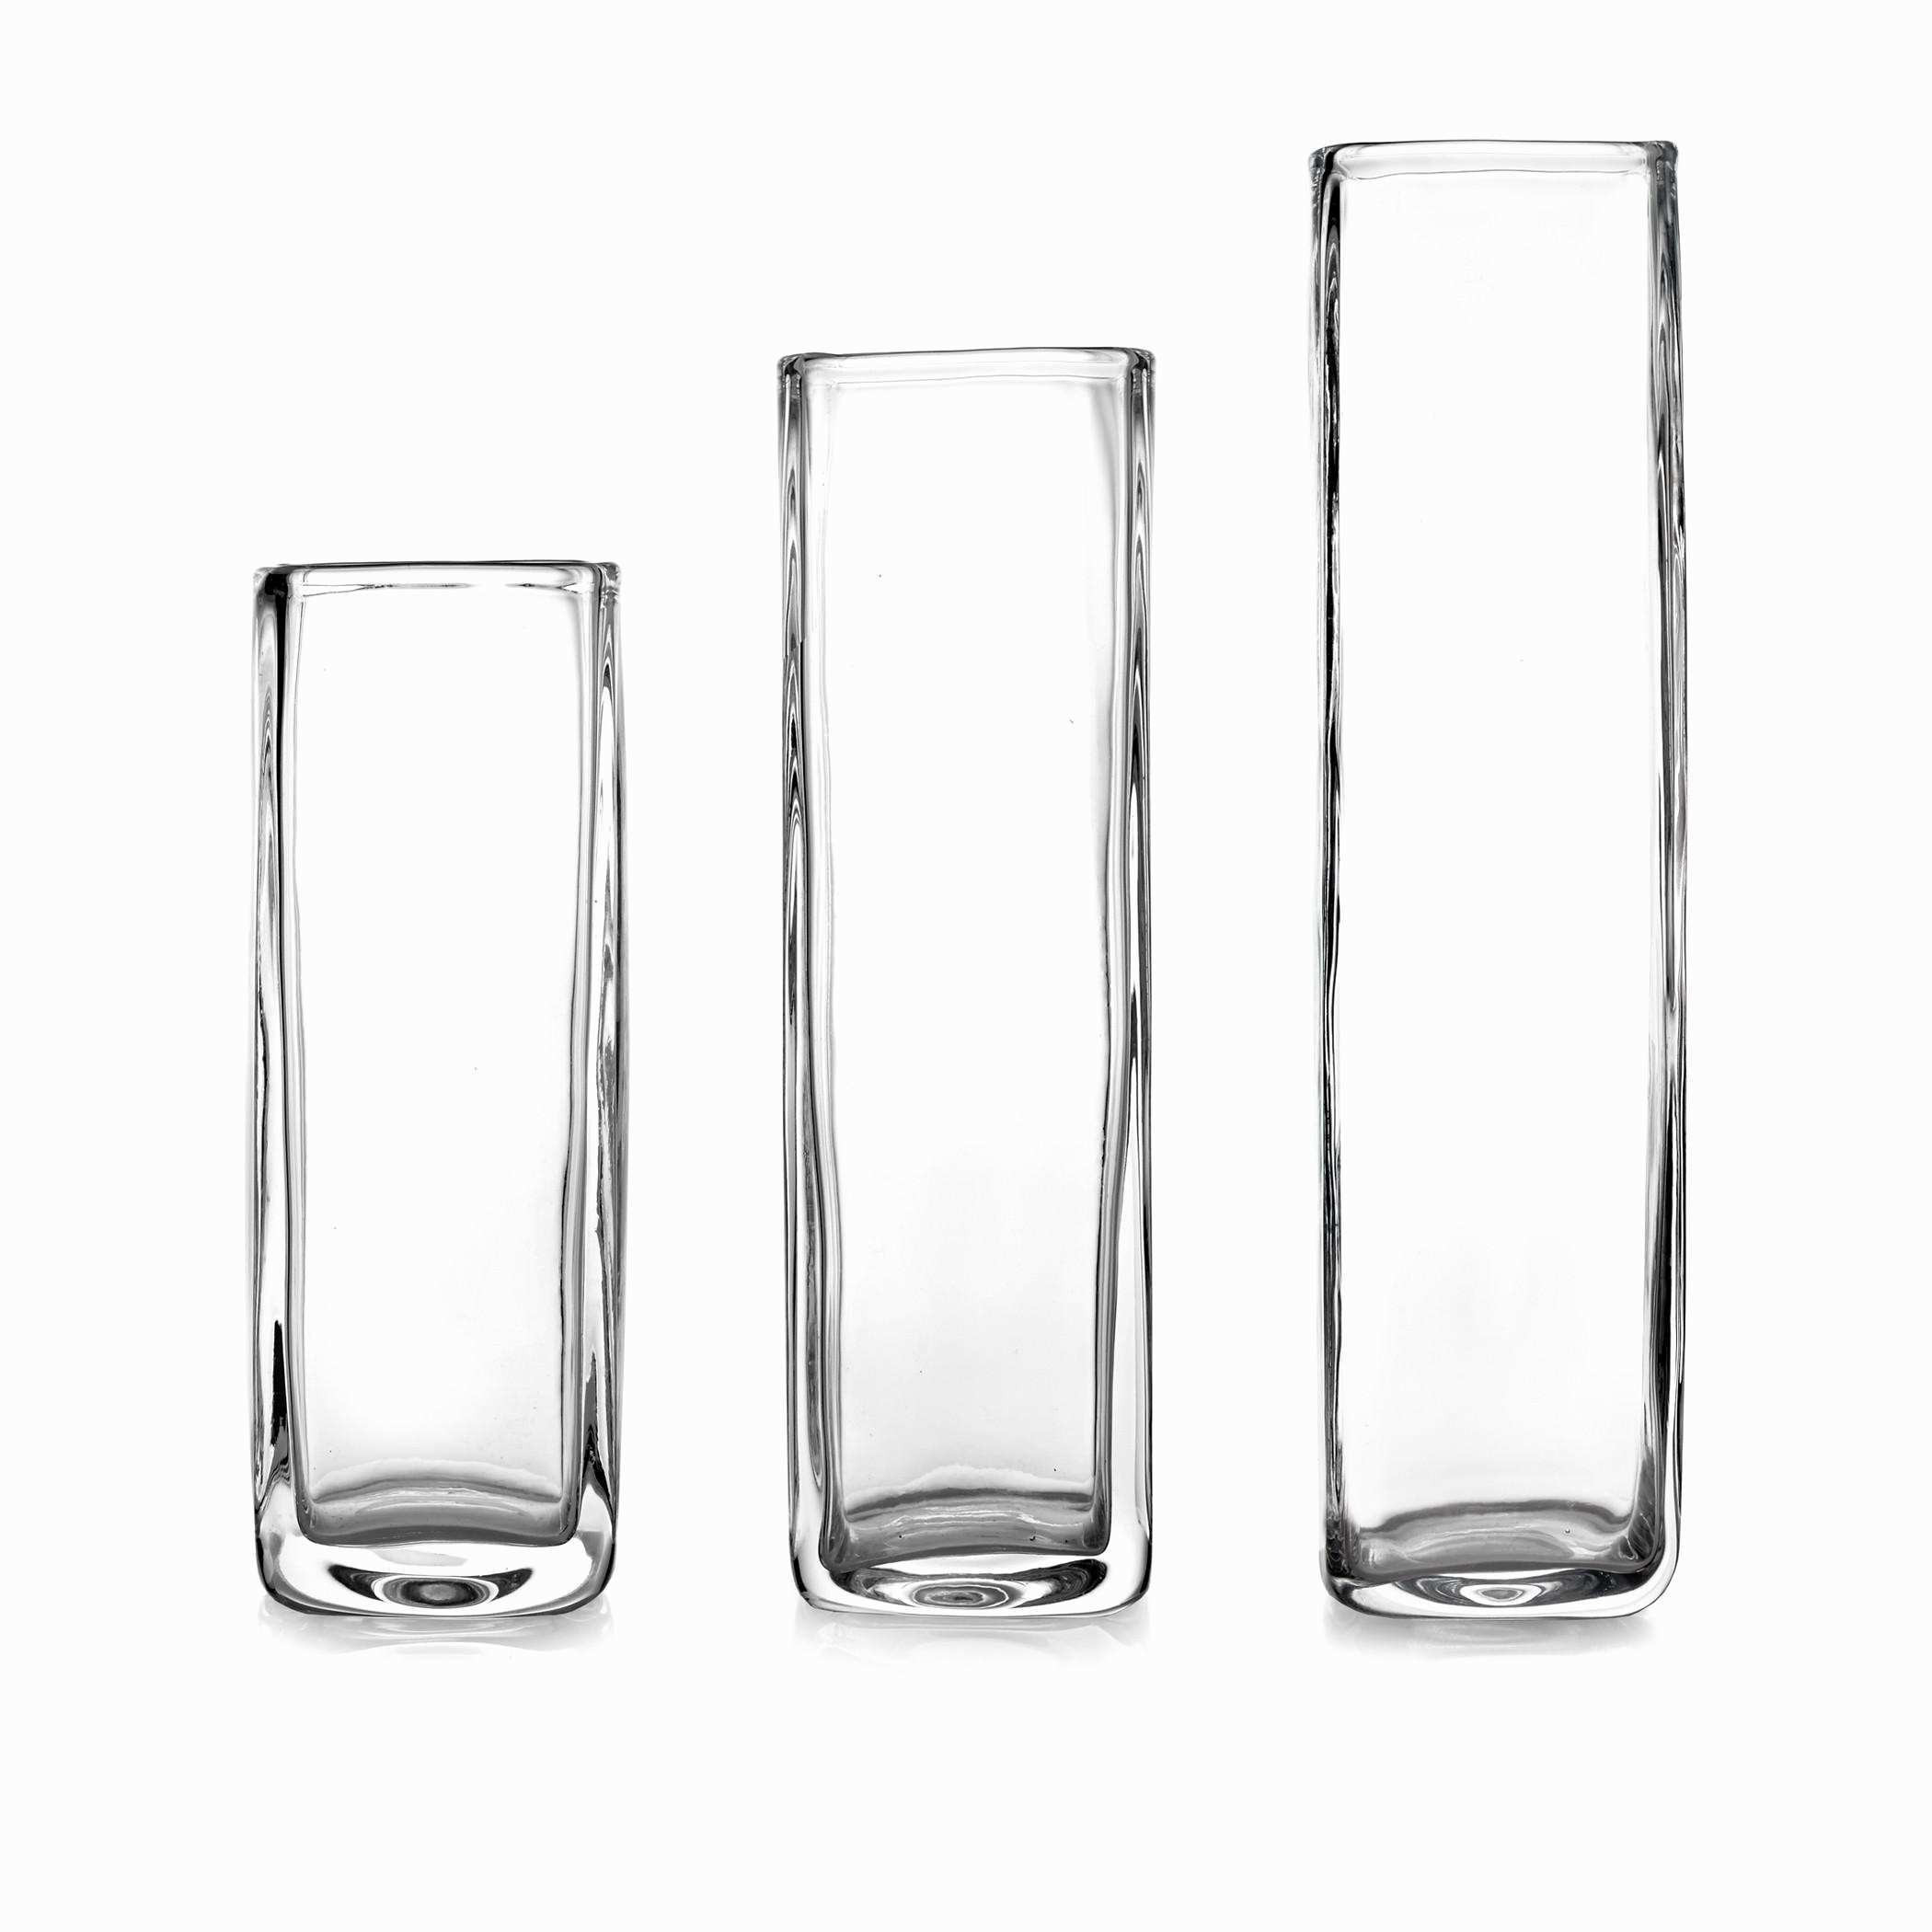 25 Recommended Bulk Glass Cylinder Vases Cheap 2024 free download bulk glass cylinder vases cheap of large glass cylinder stock 12 glass cylinder vase bulk glass throughout gallery of large glass cylinder